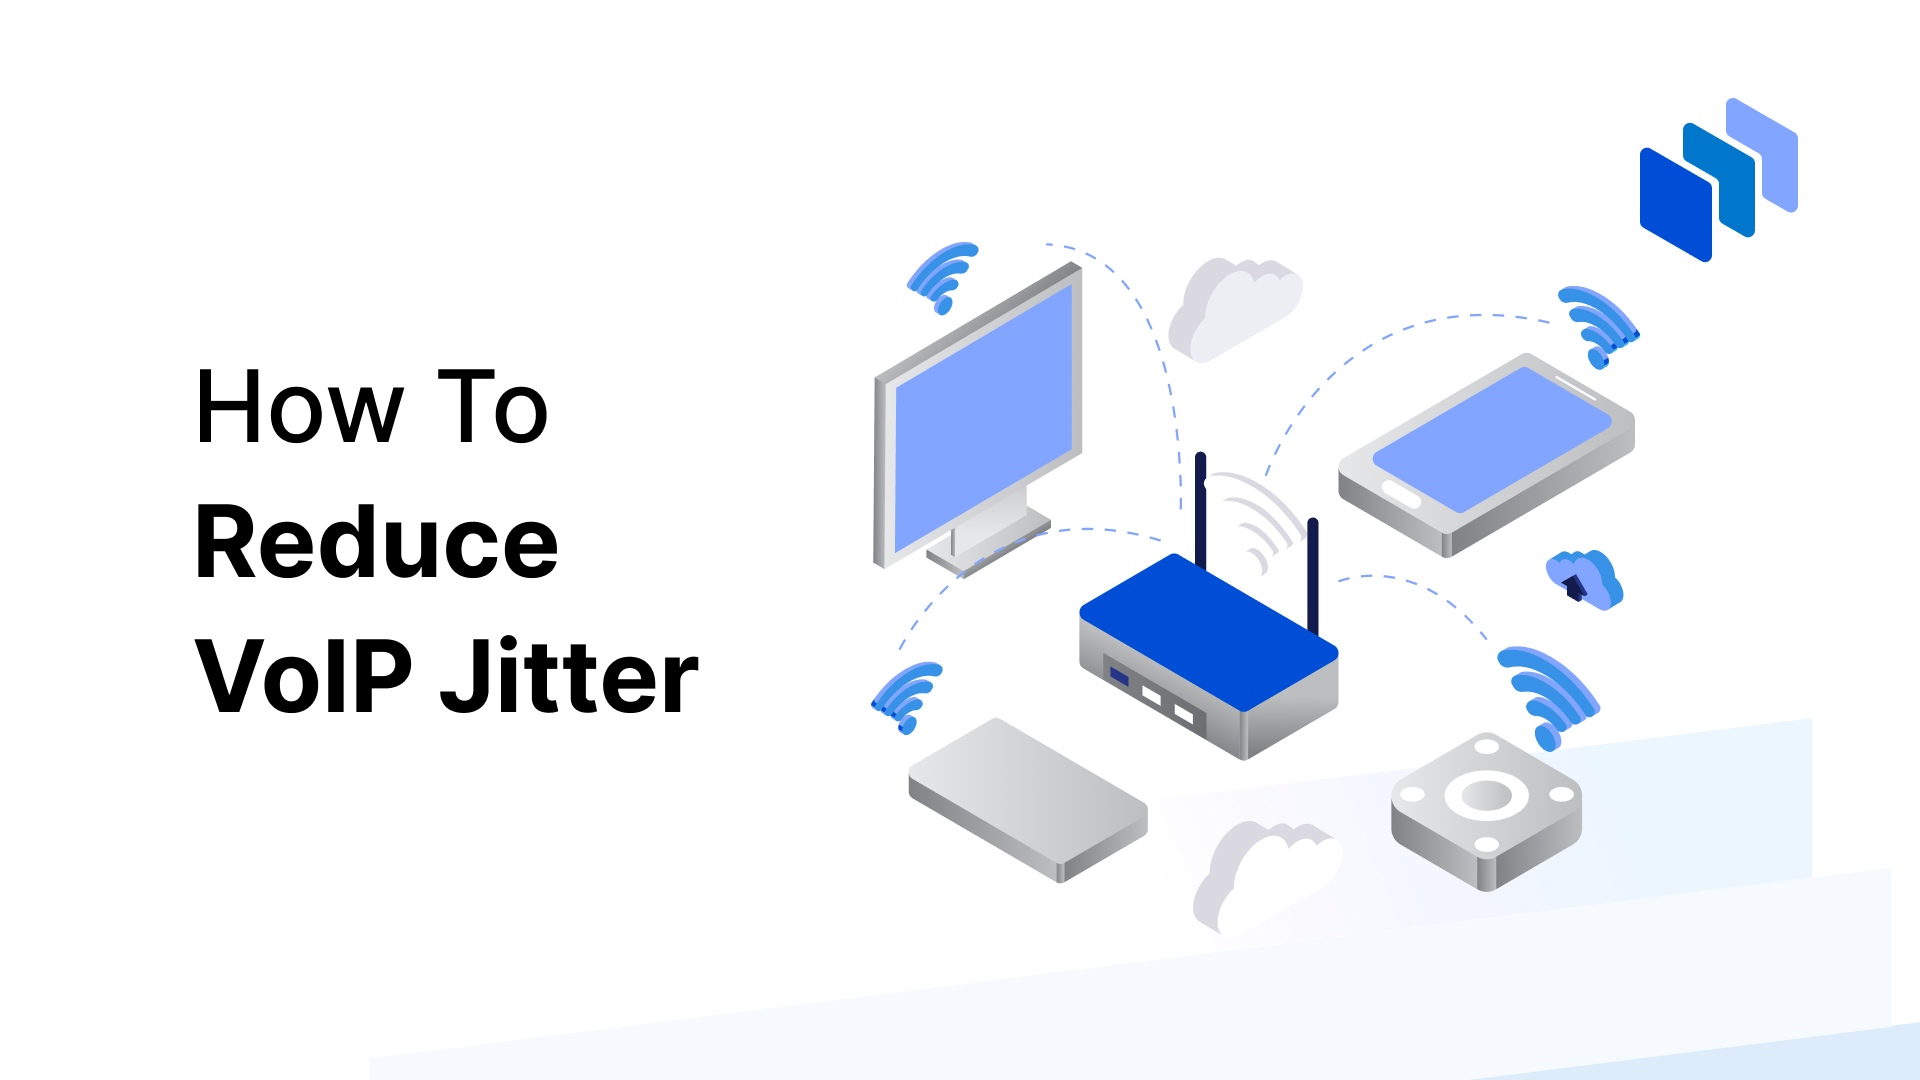 How To Reduce VoIP Jitter